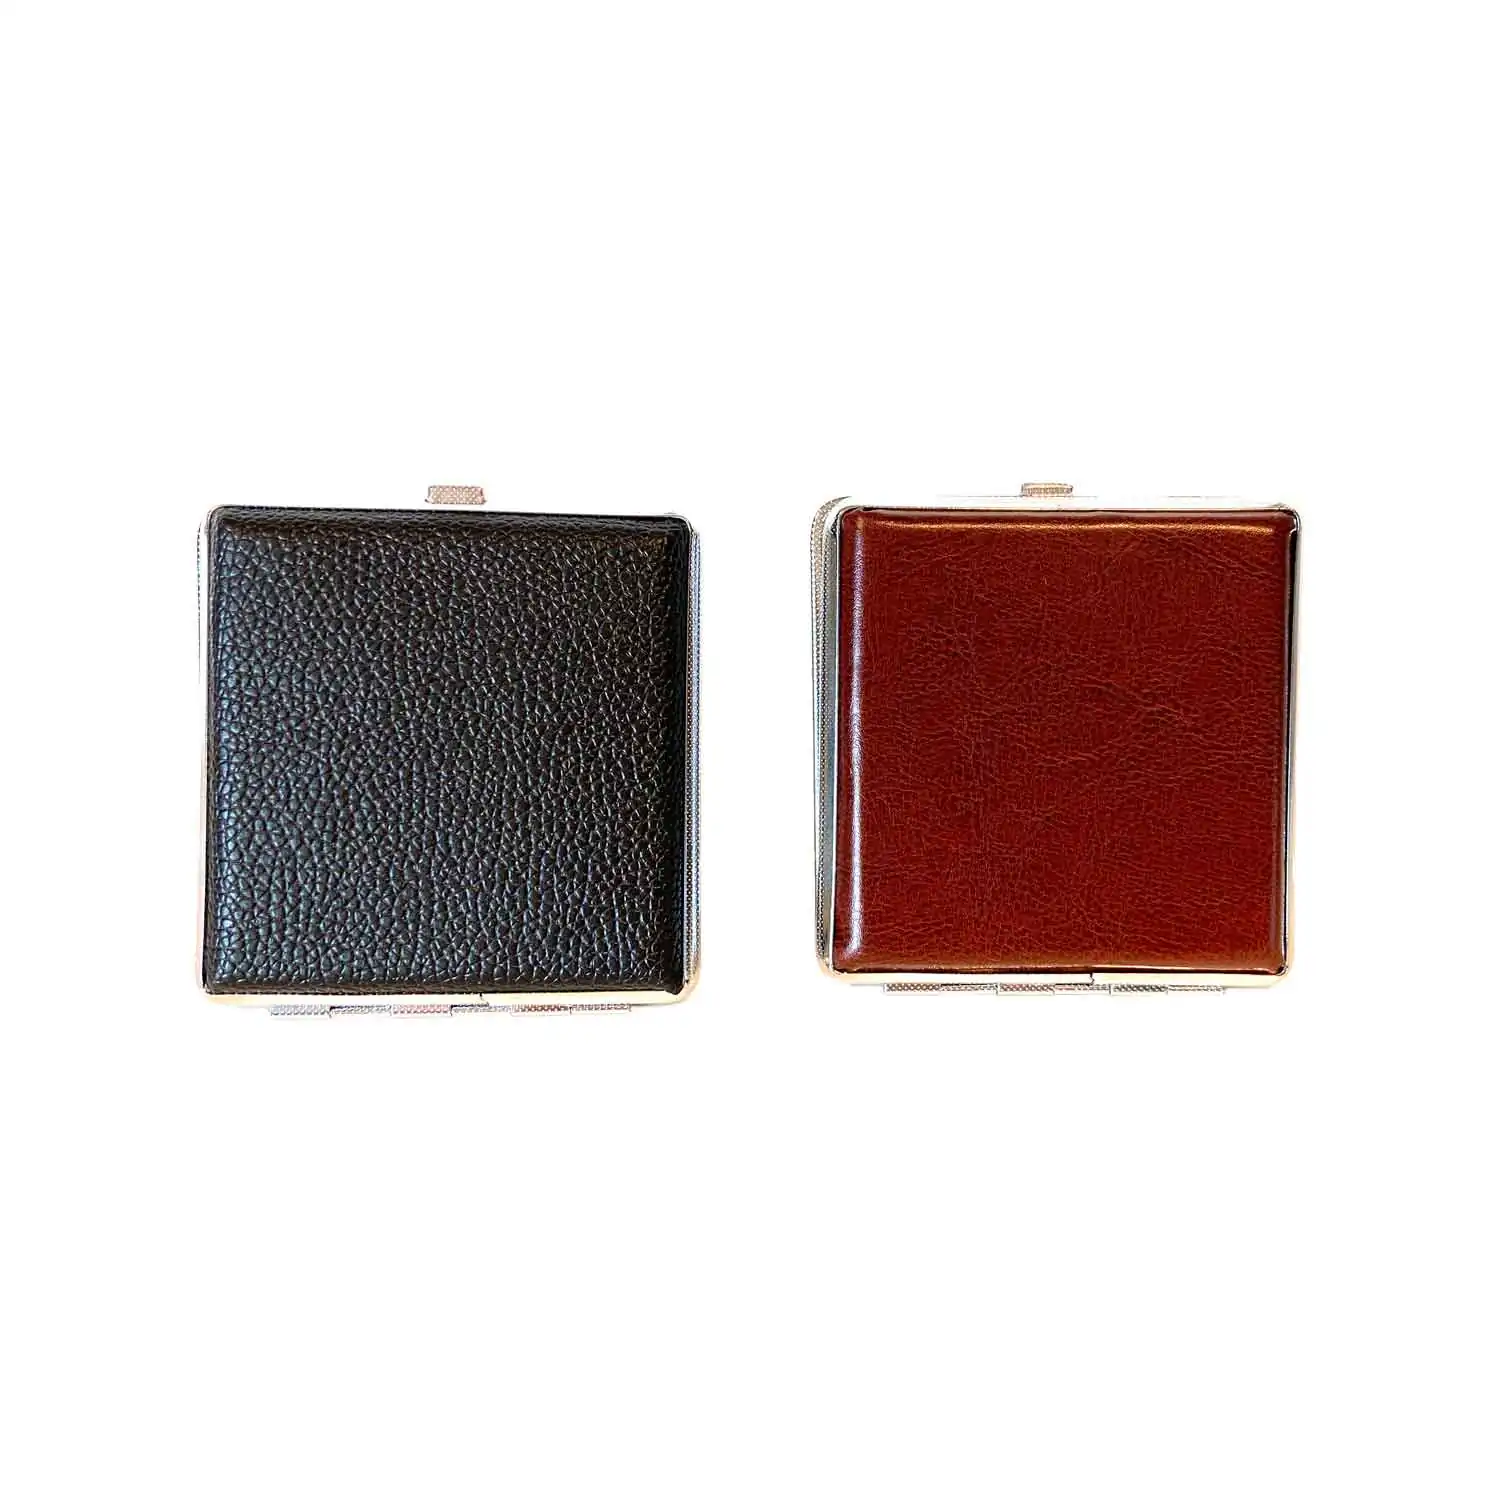 Cigarette case rt-2043 - Buy at Real Tobacco